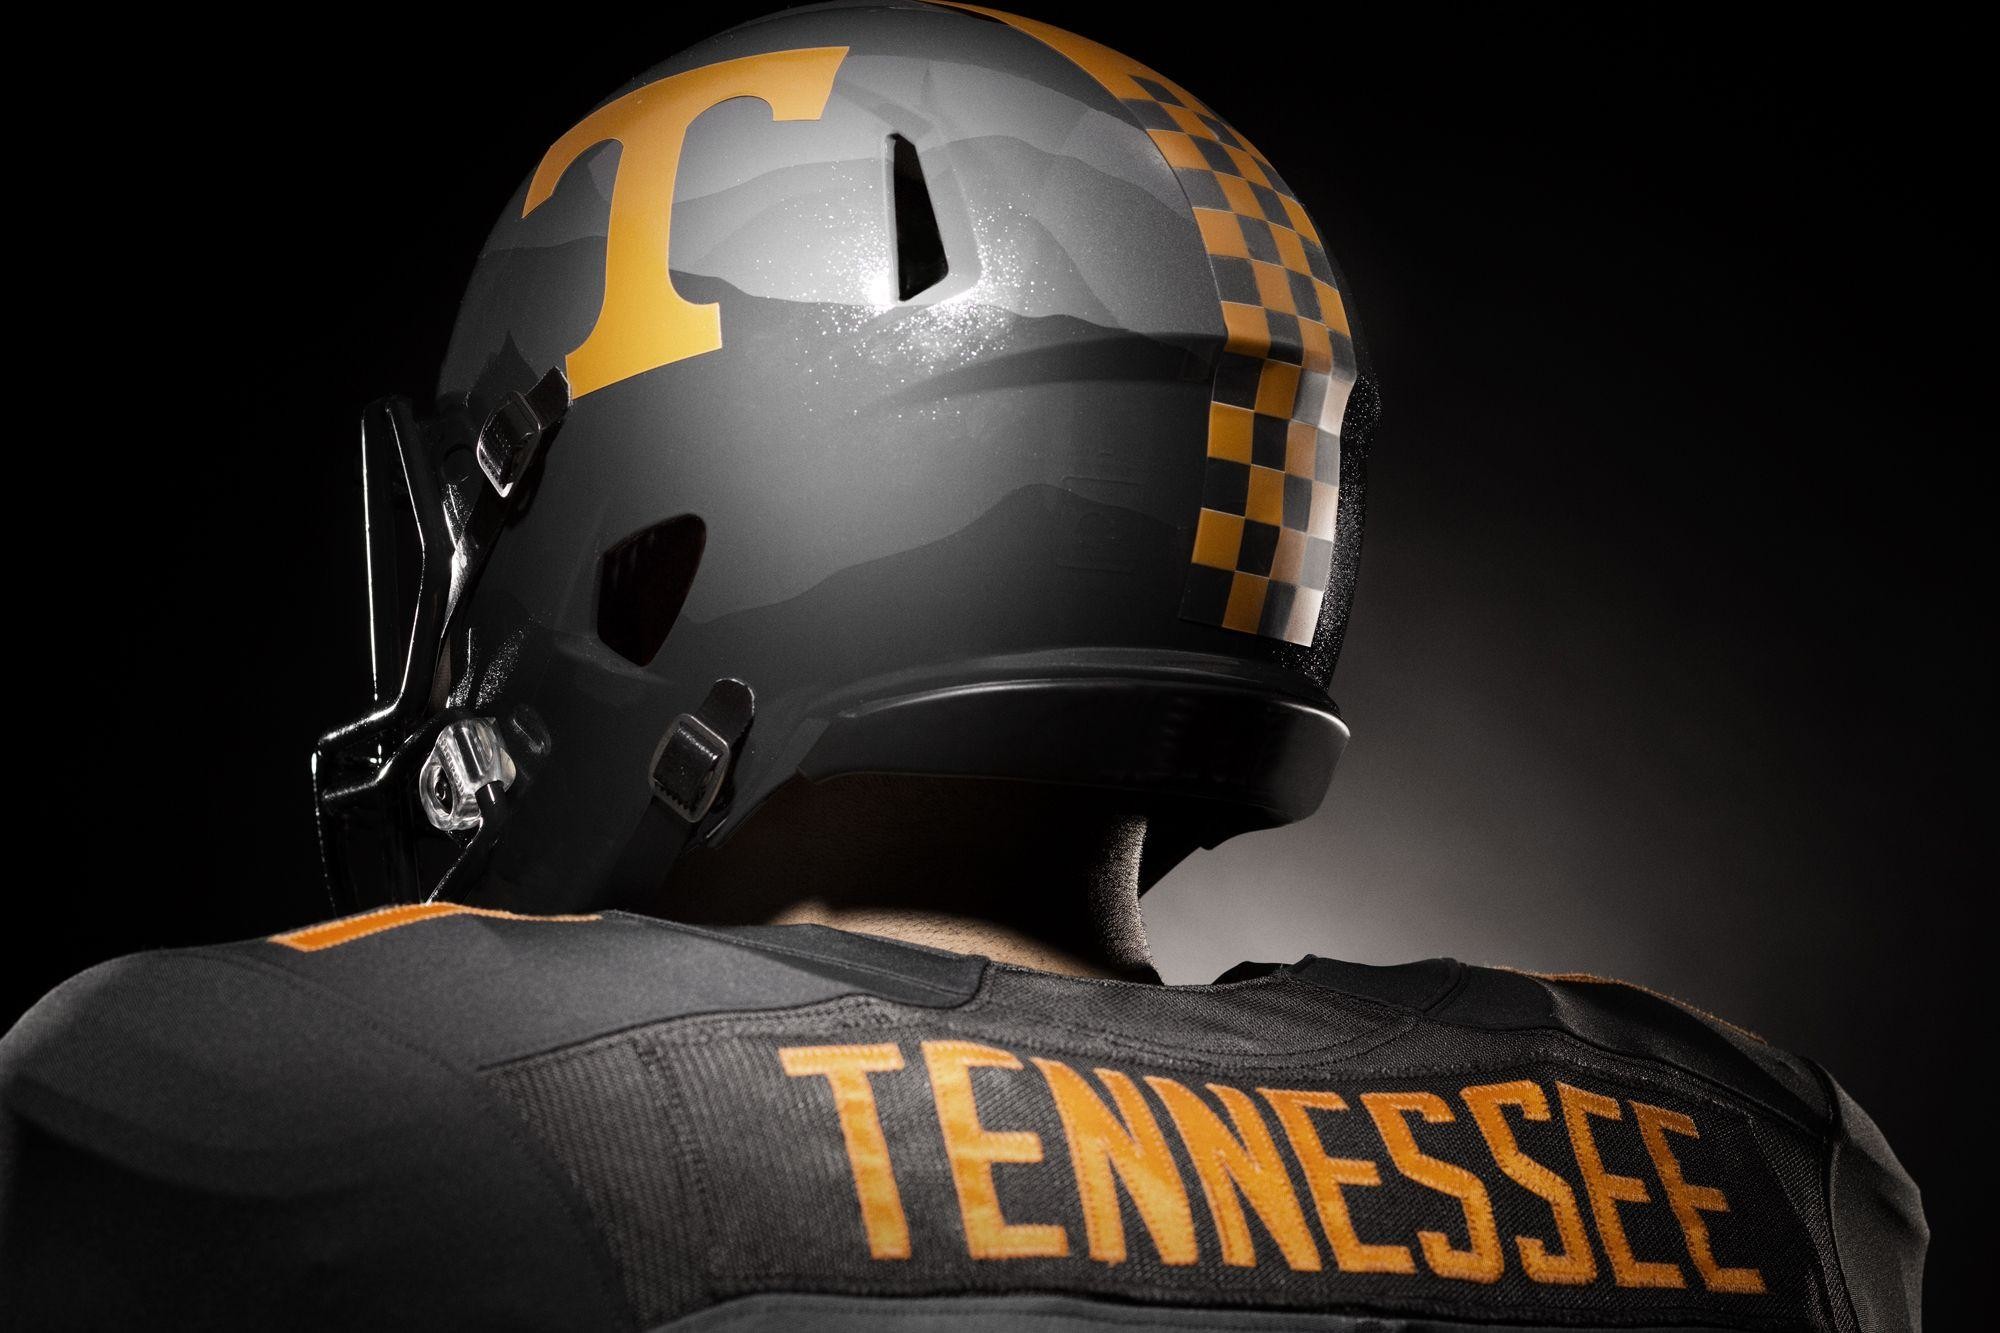 Tennessee Football Wallpapers 2018.